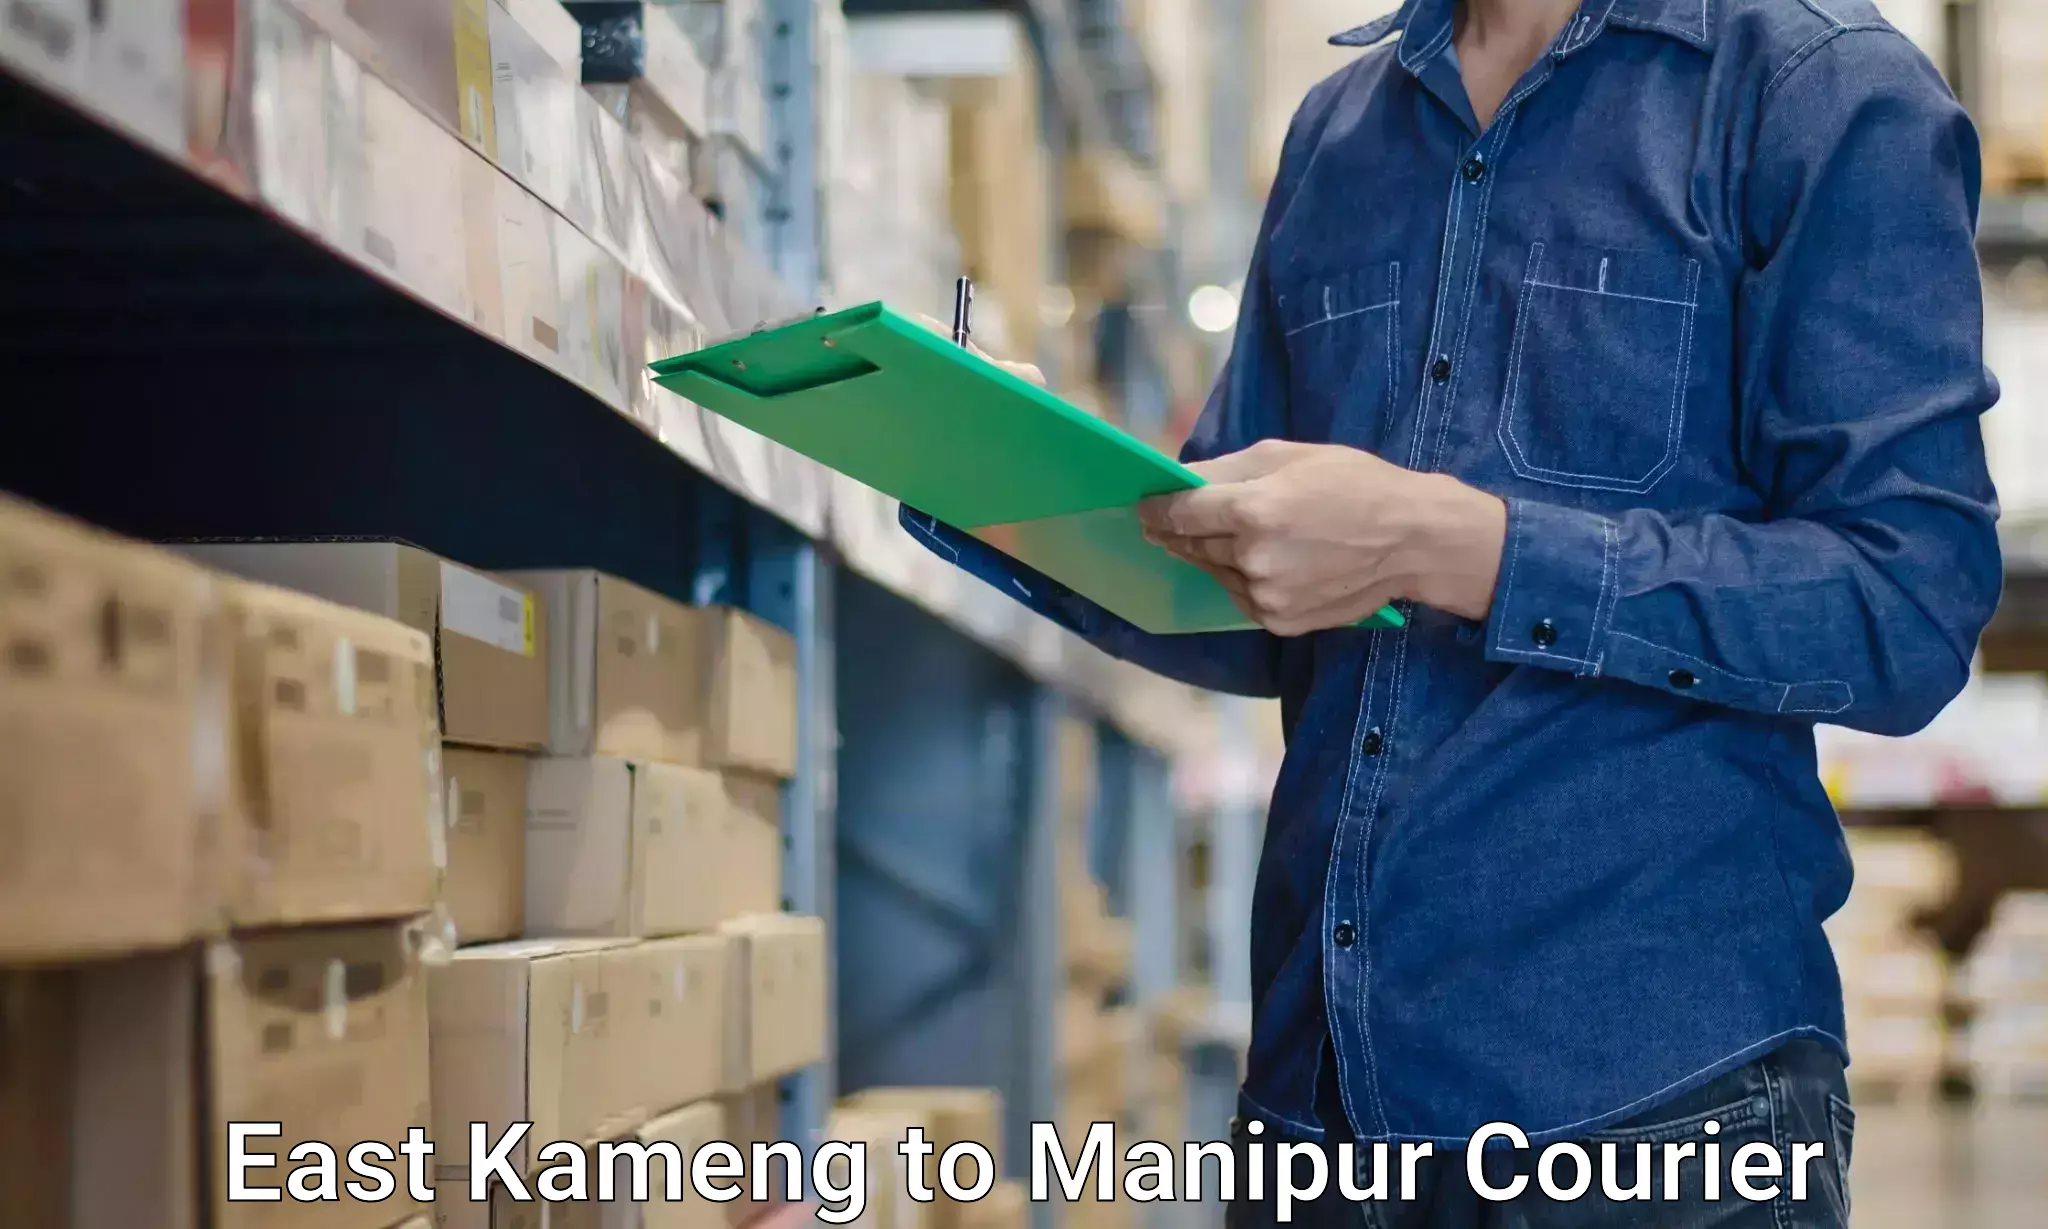 Full-service movers East Kameng to Manipur